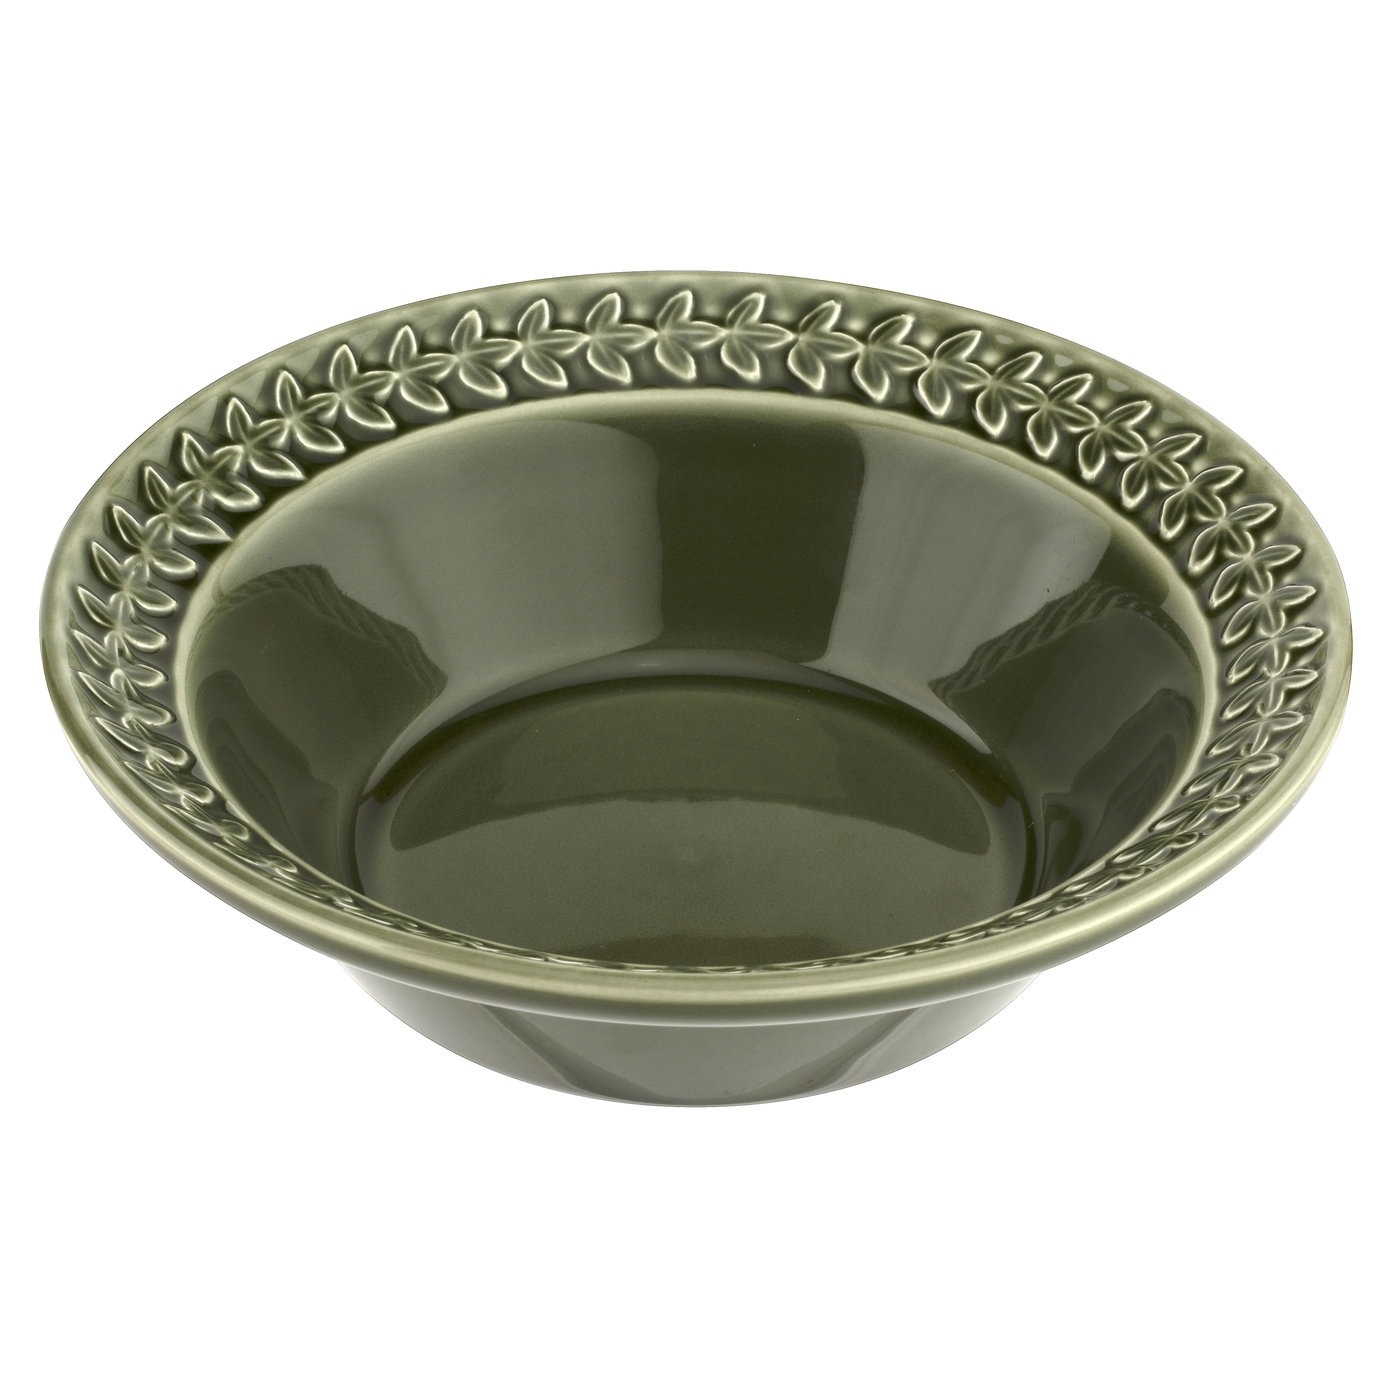 Botanic Garden Harmony 4 Cereal Bowls, Forest image number null